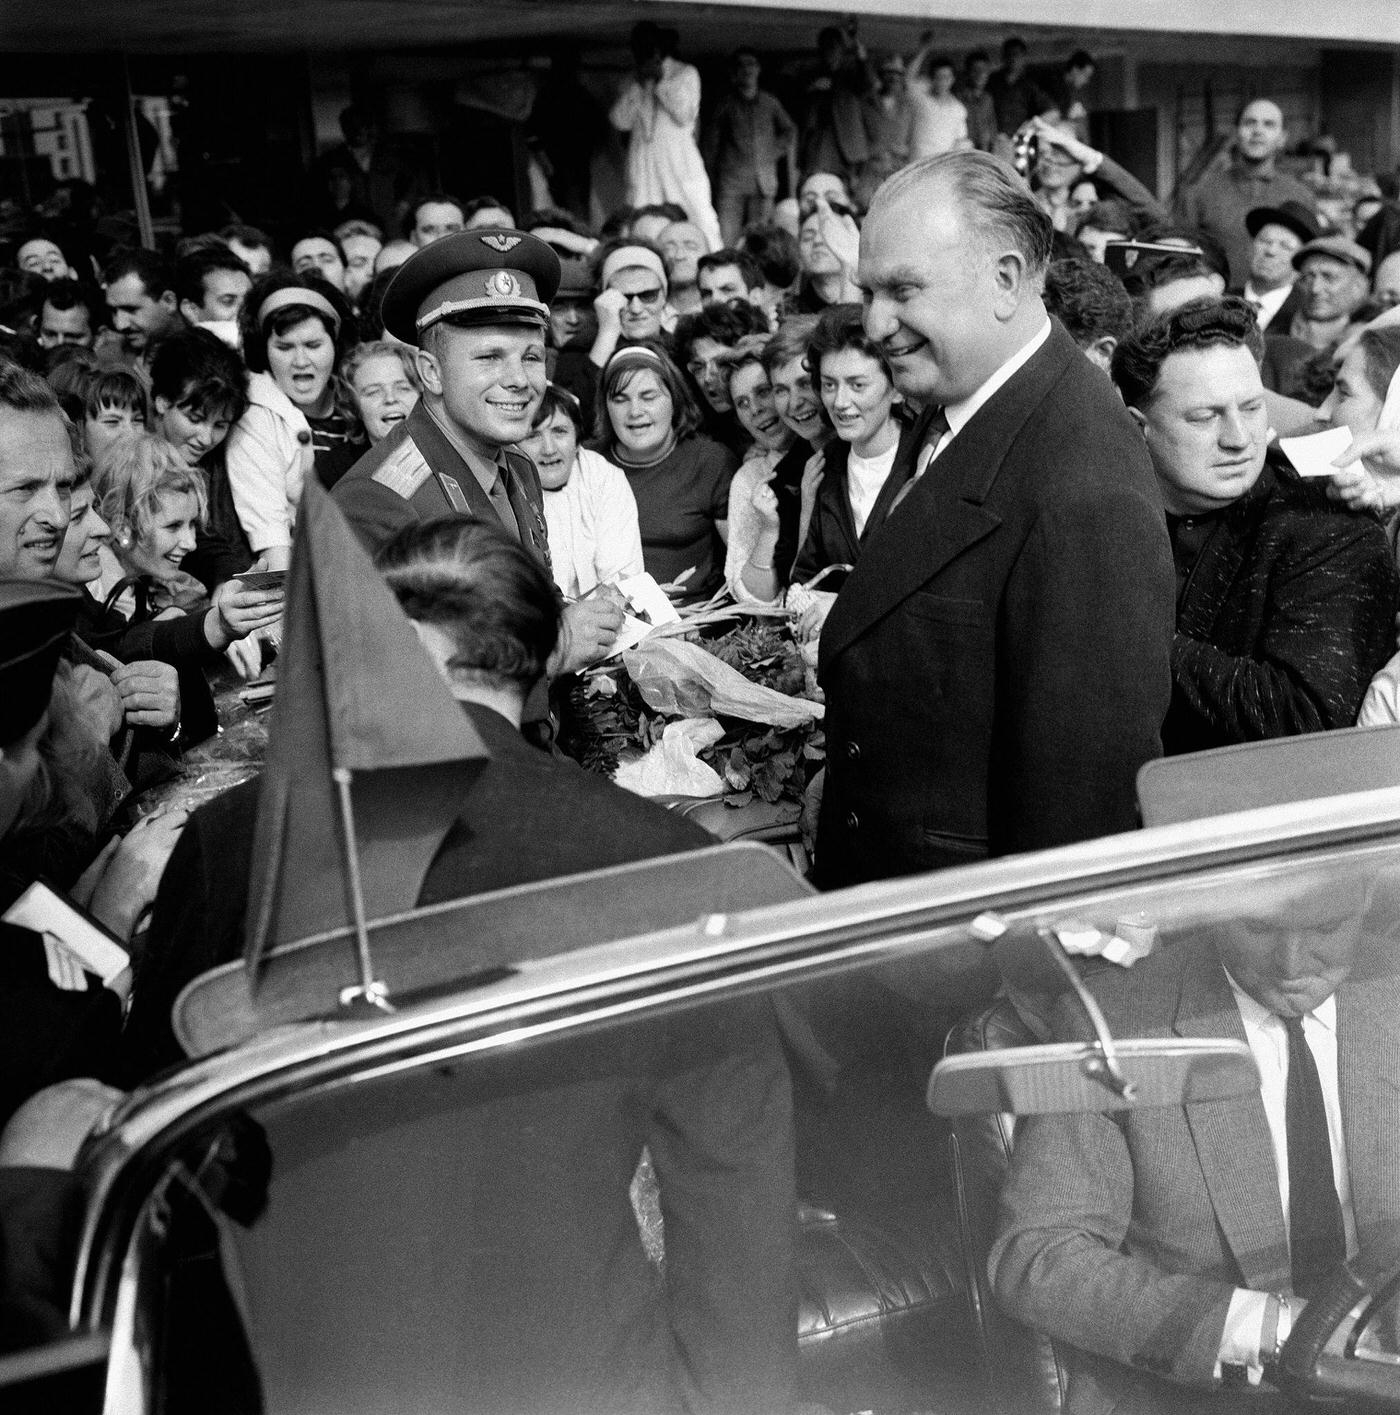 Arrival of Russian cosmonaut Yuri Gagarin at Le Bourget airport, welcomed by Russian ambassador in France Sergei Vinogradov, 1963